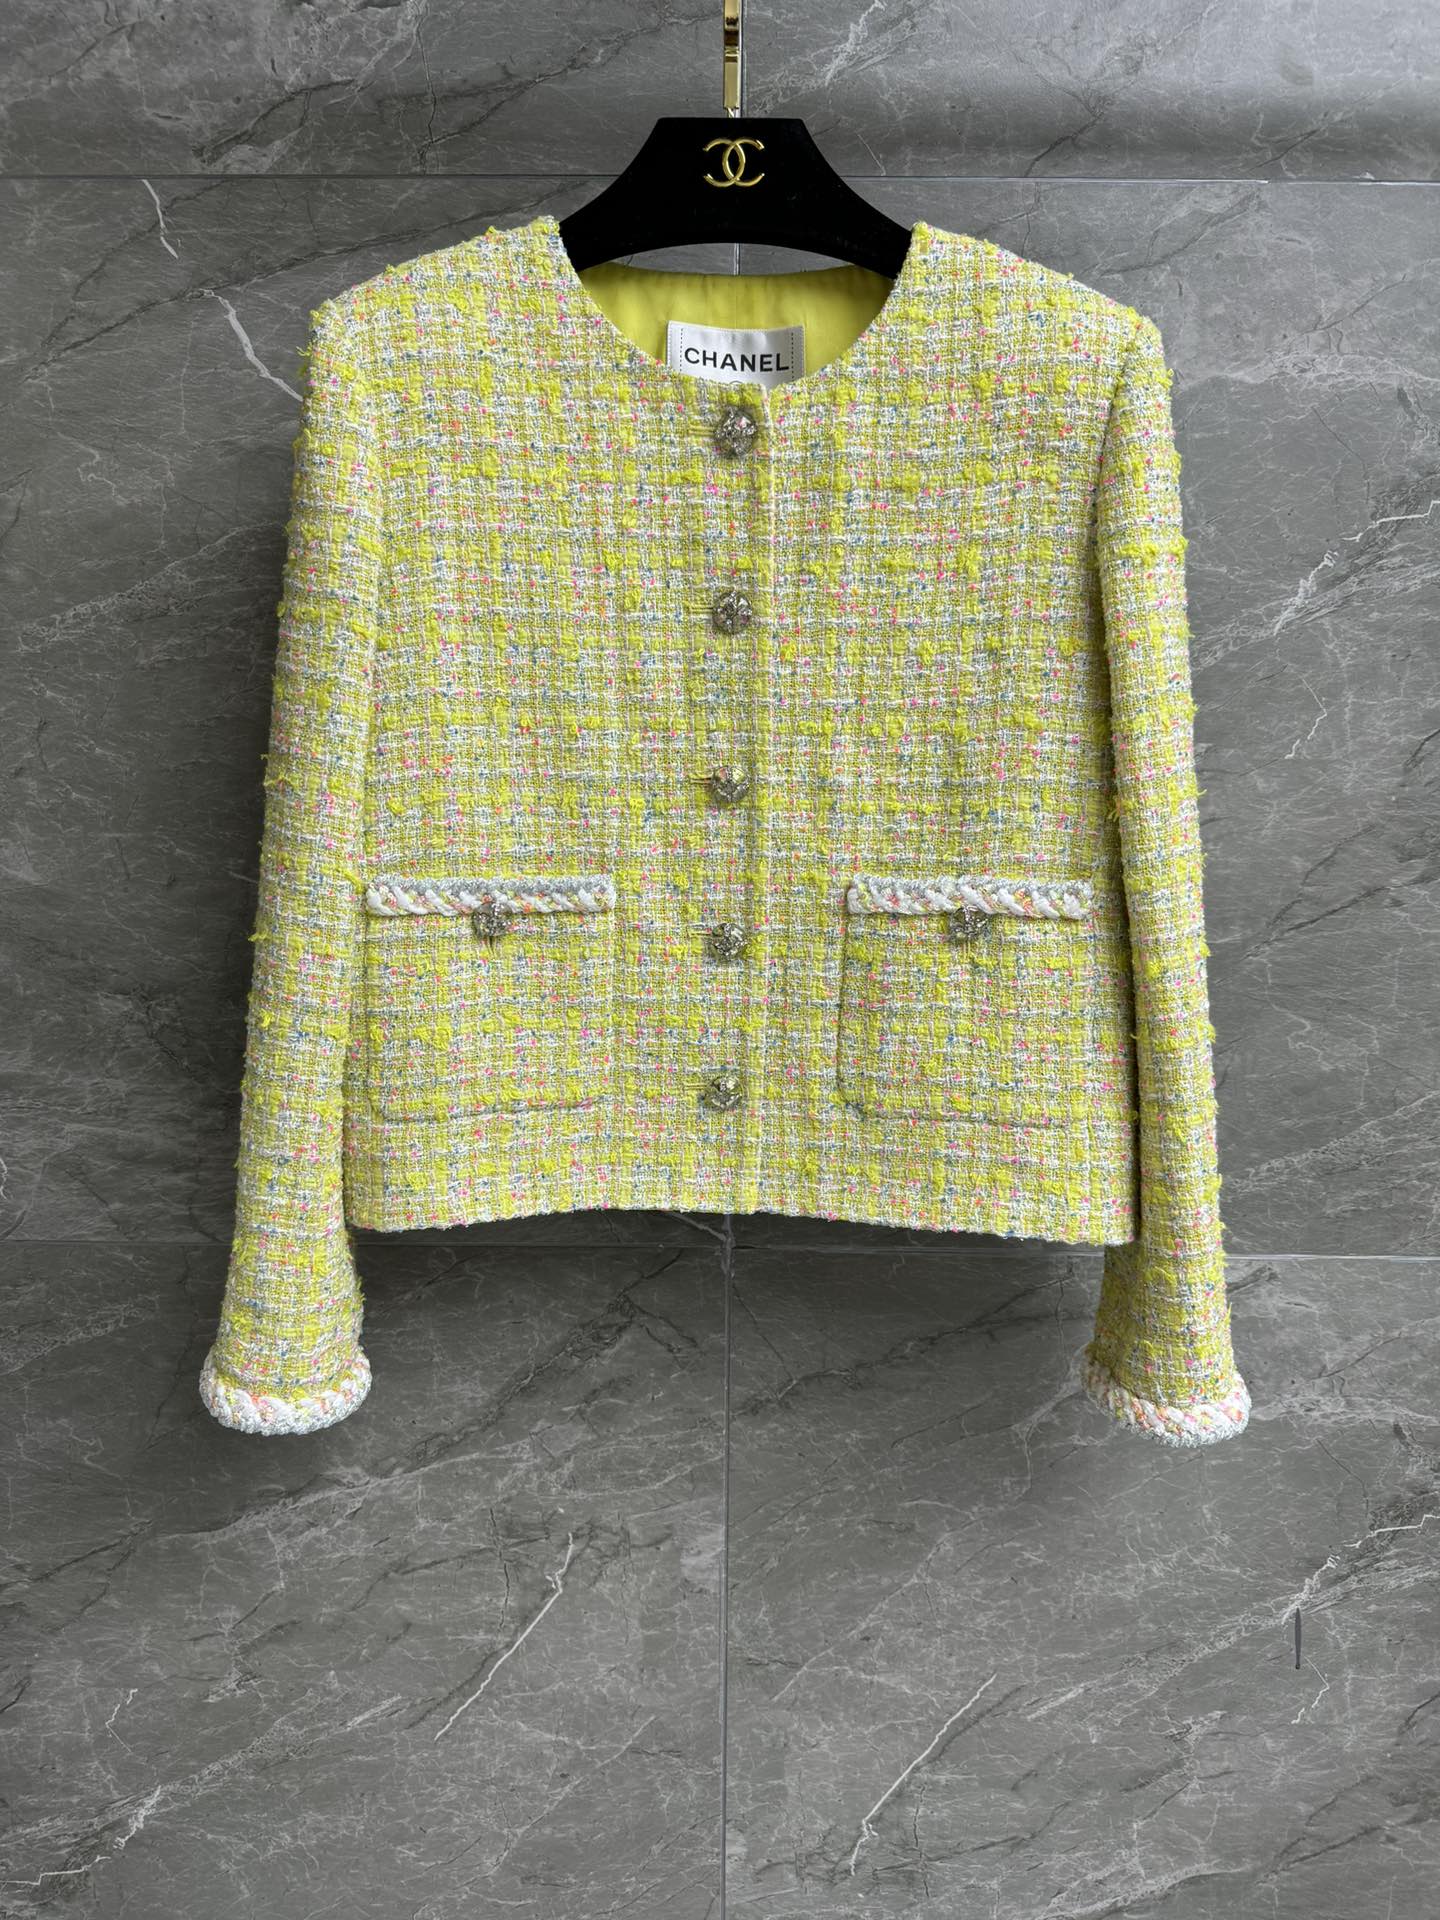 Designer Wholesale Replica
 Chanel Clothing Coats & Jackets Green Yellow Sewing Silk Spring Collection SML535680